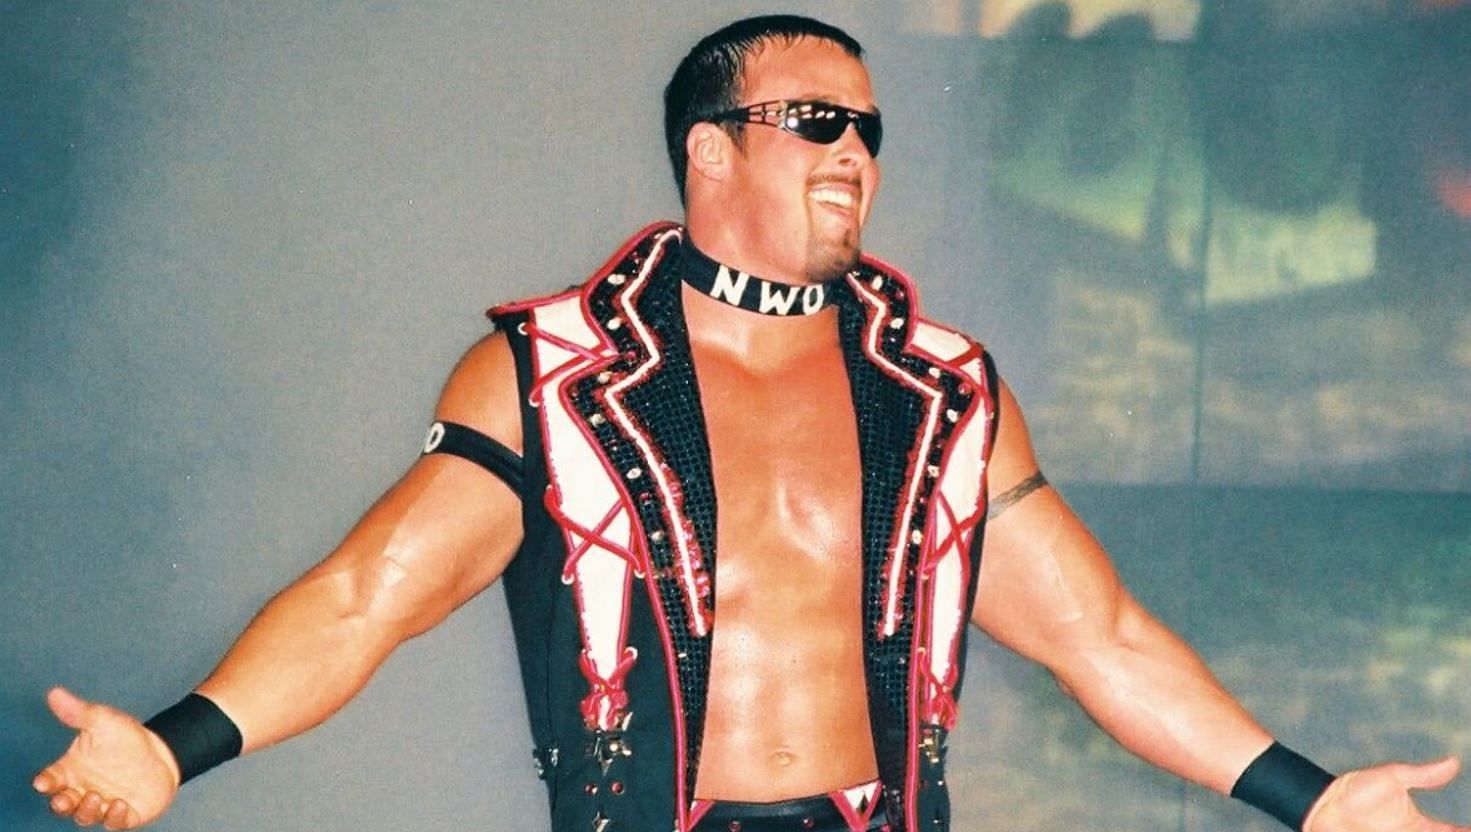 Buff Bagwell wrestled in WCW from 1991 to 2001